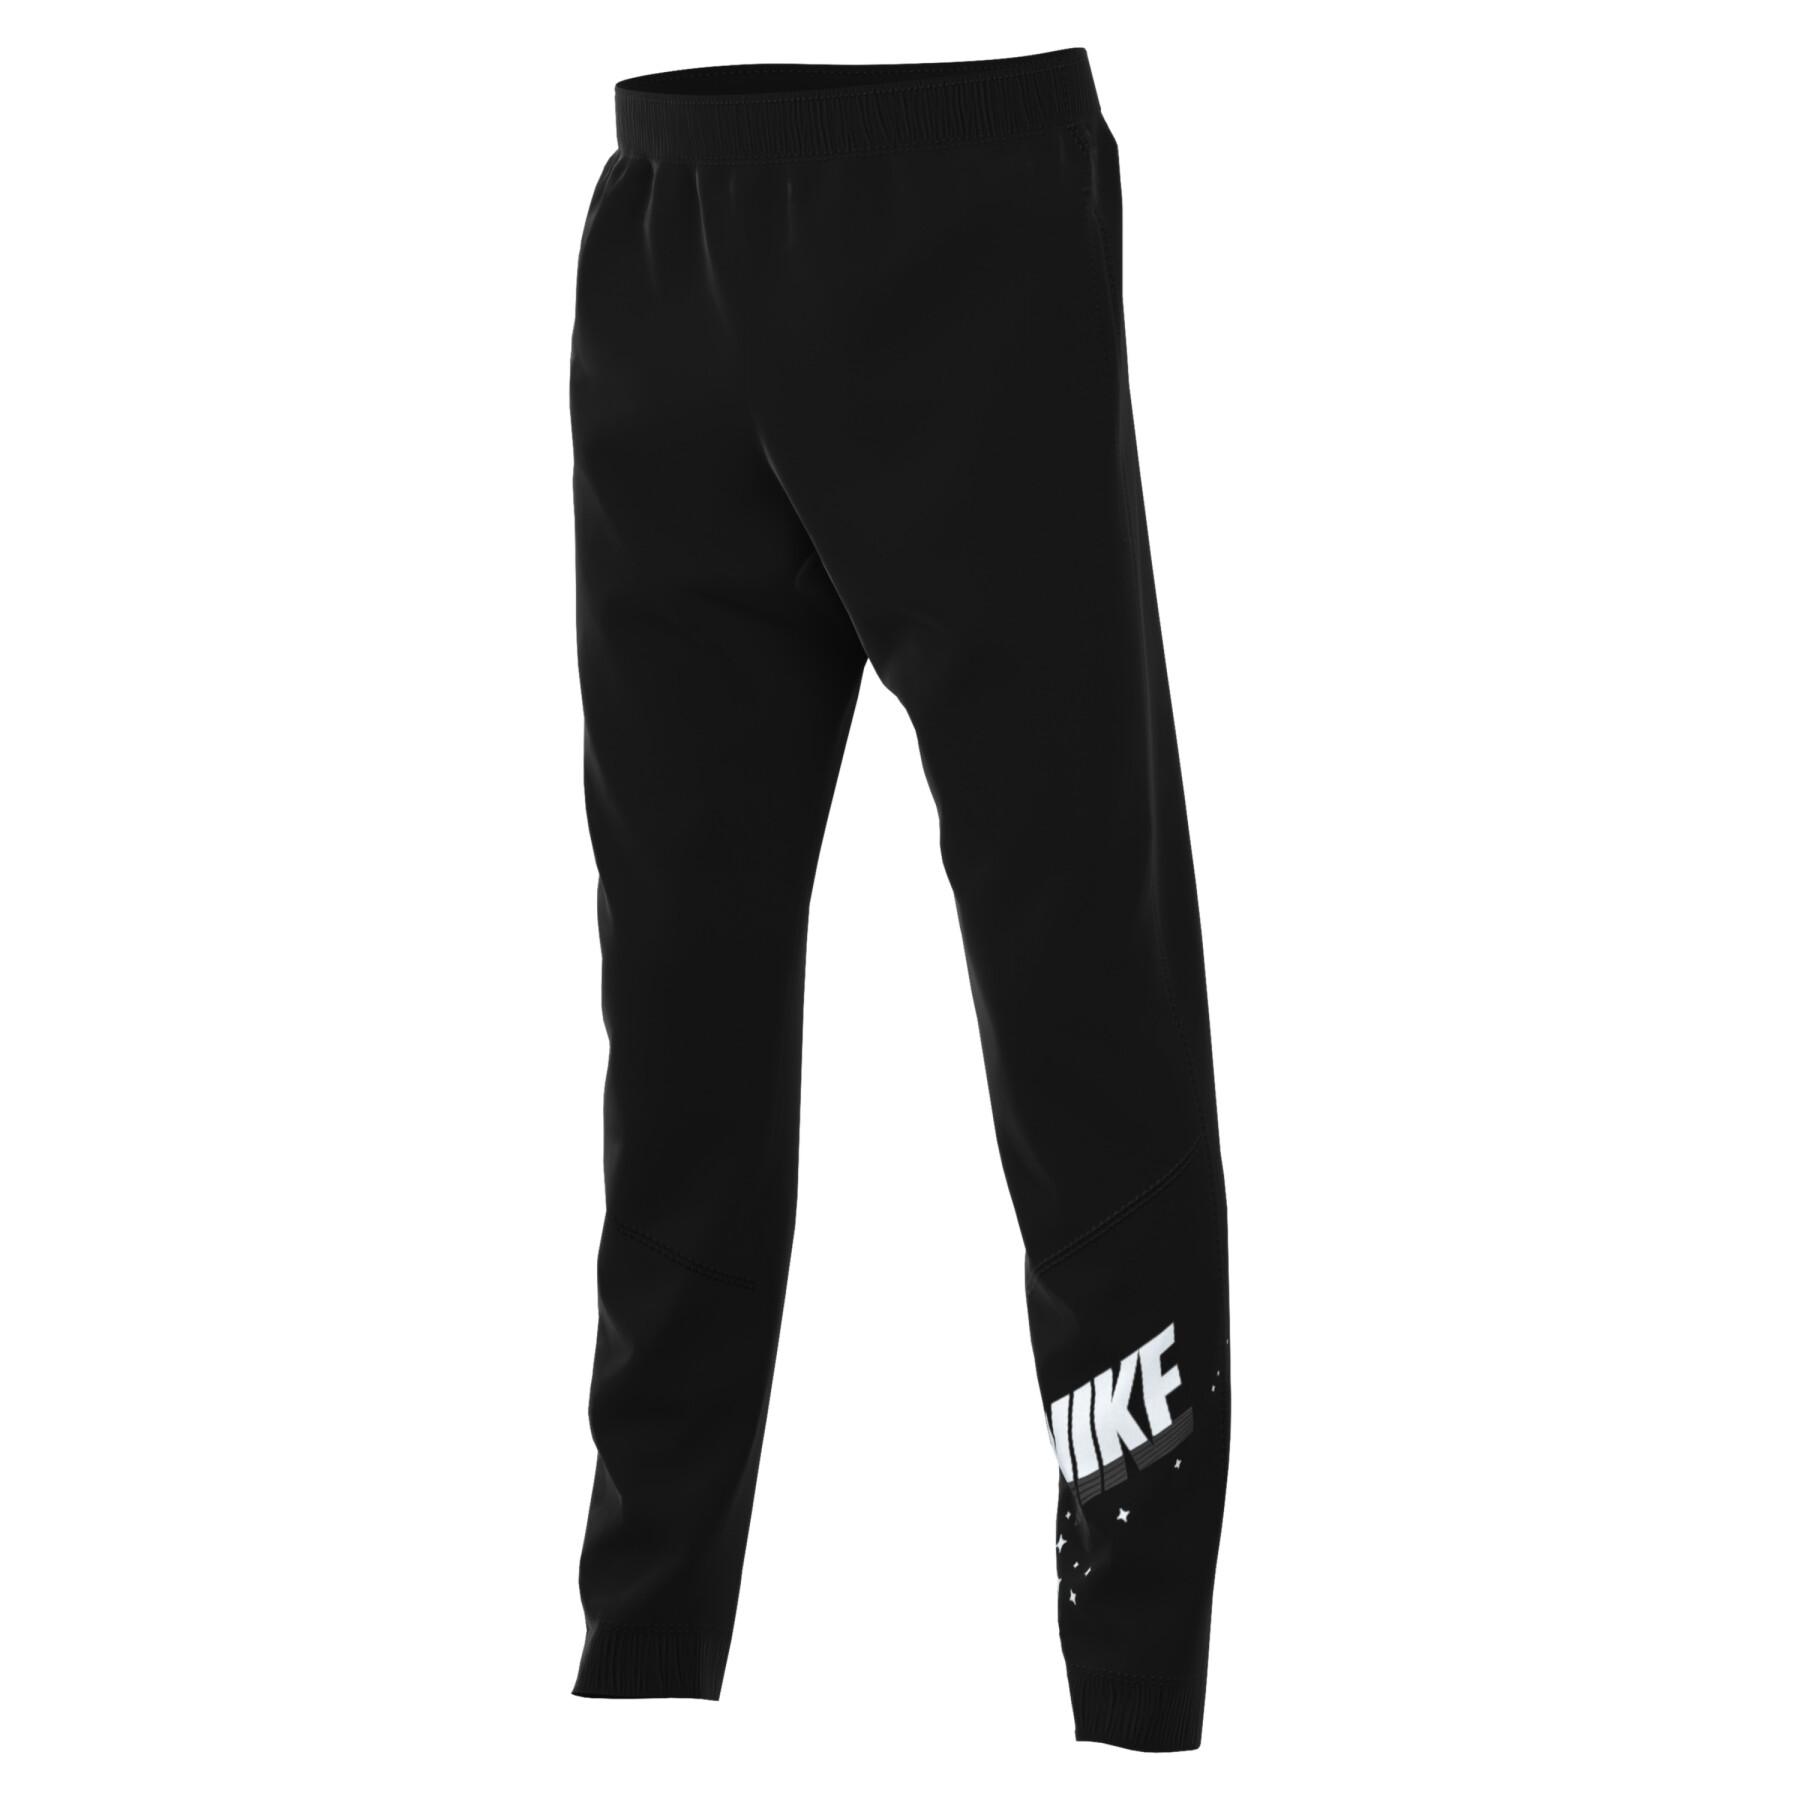 Children's jogging suit Nike Therma-FIT